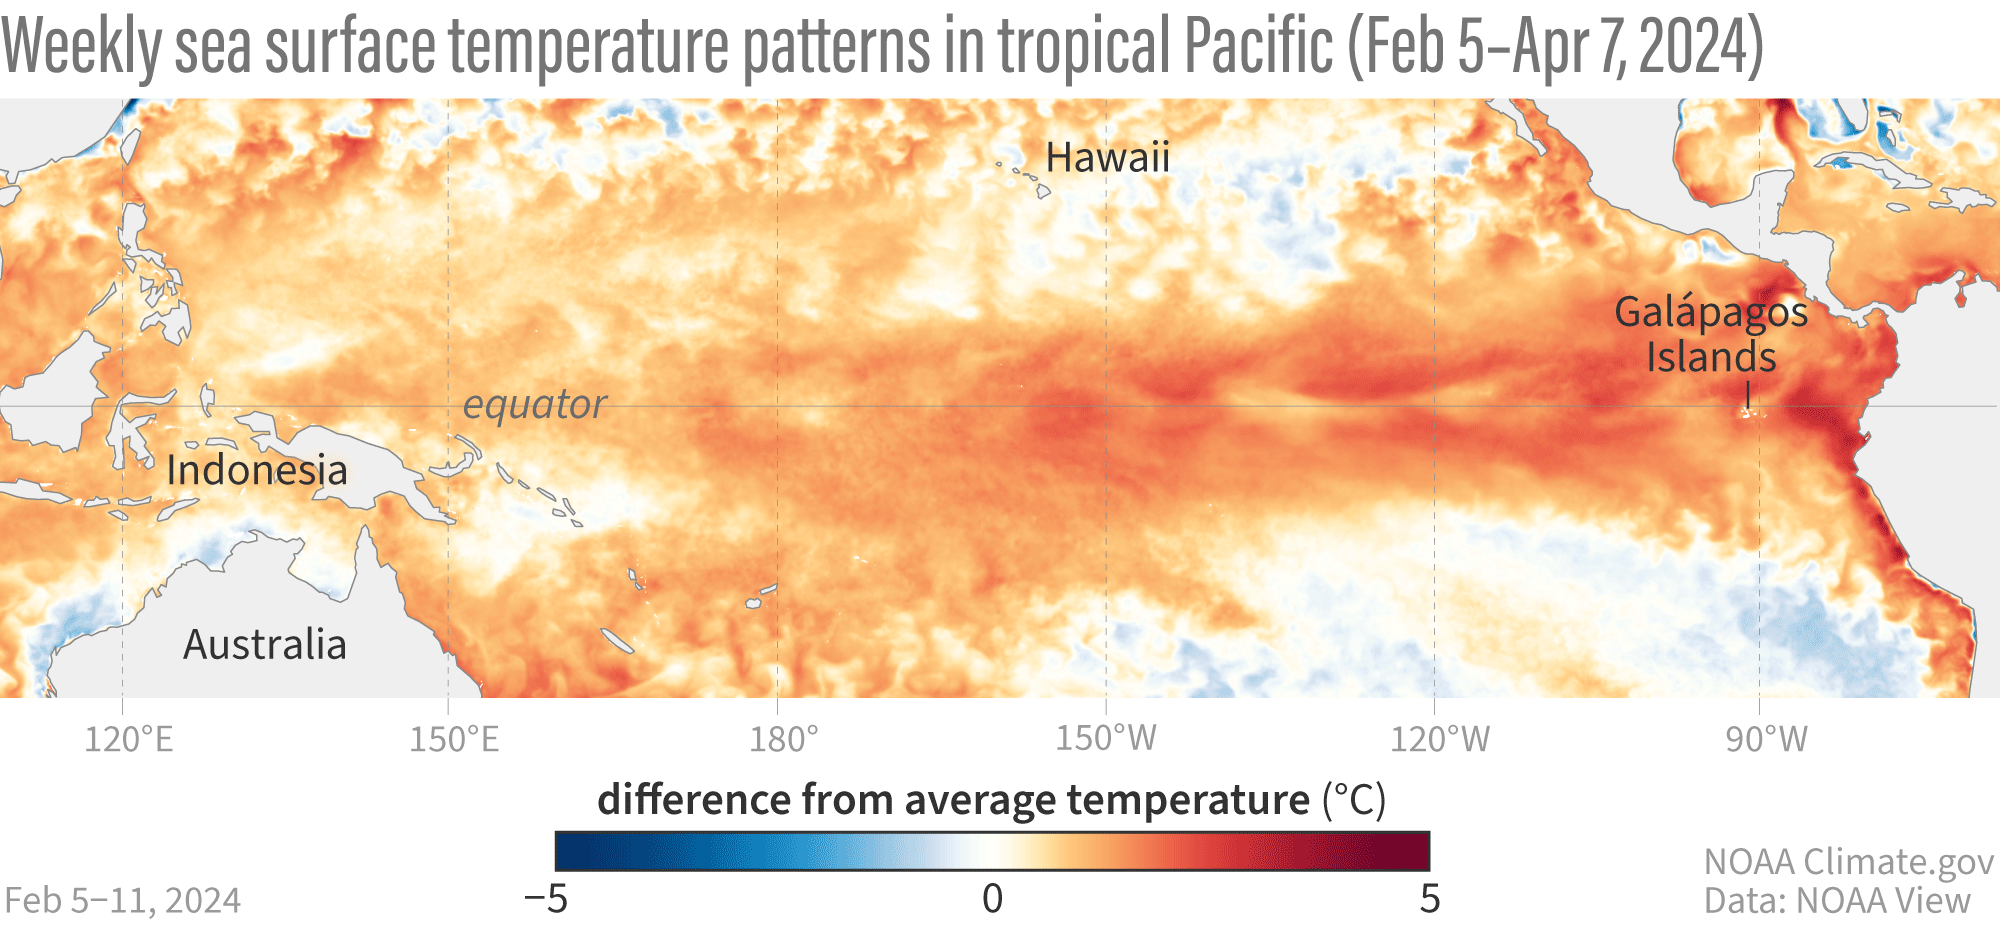 ENSO weekly SST patterns in the tropical Pacific from April 11, 2024